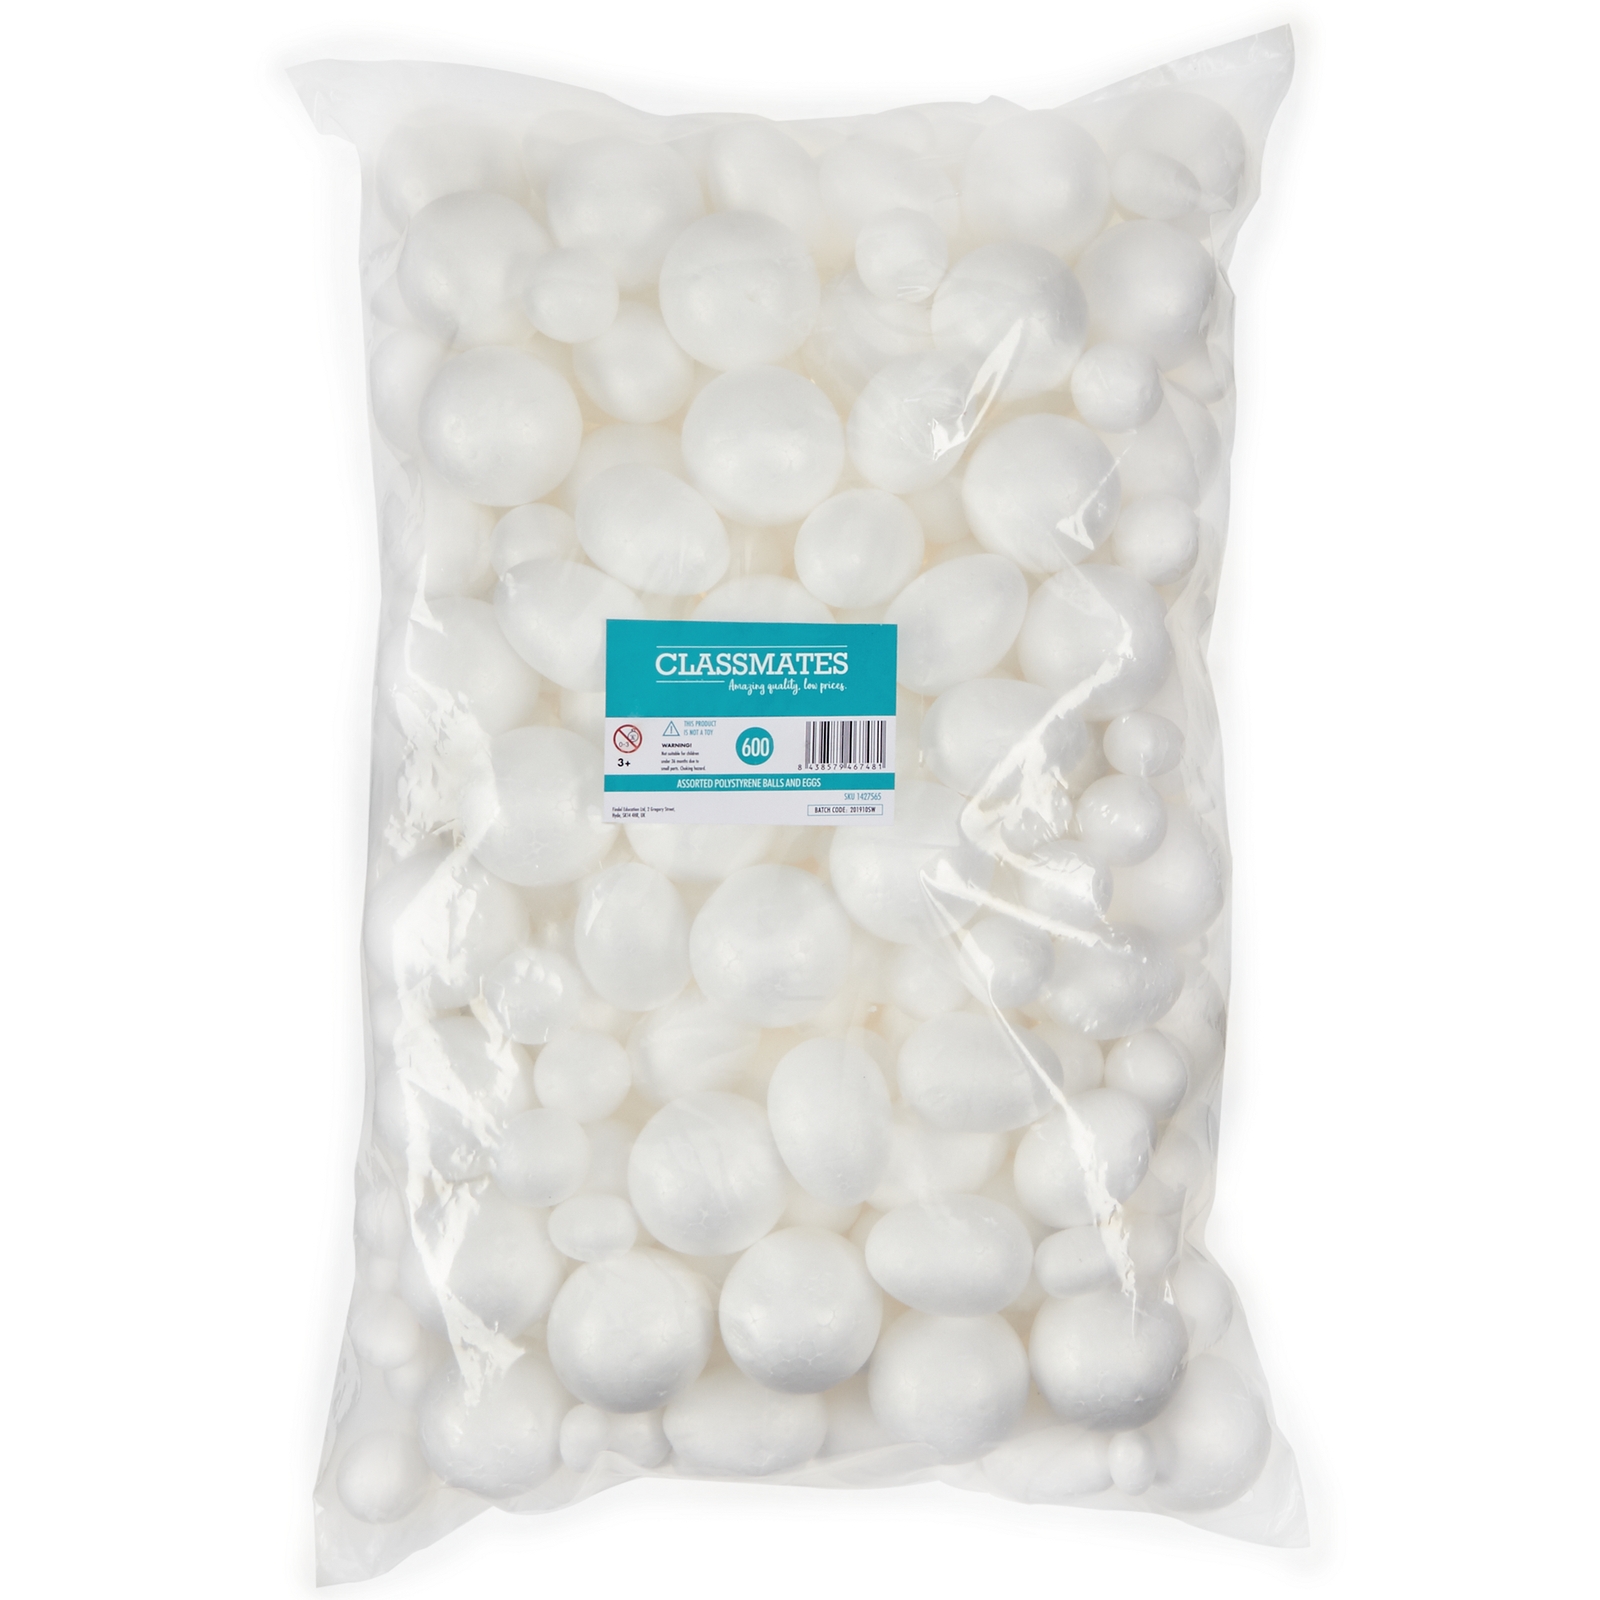 Polystyrene Balls and Eggs Pack of 600